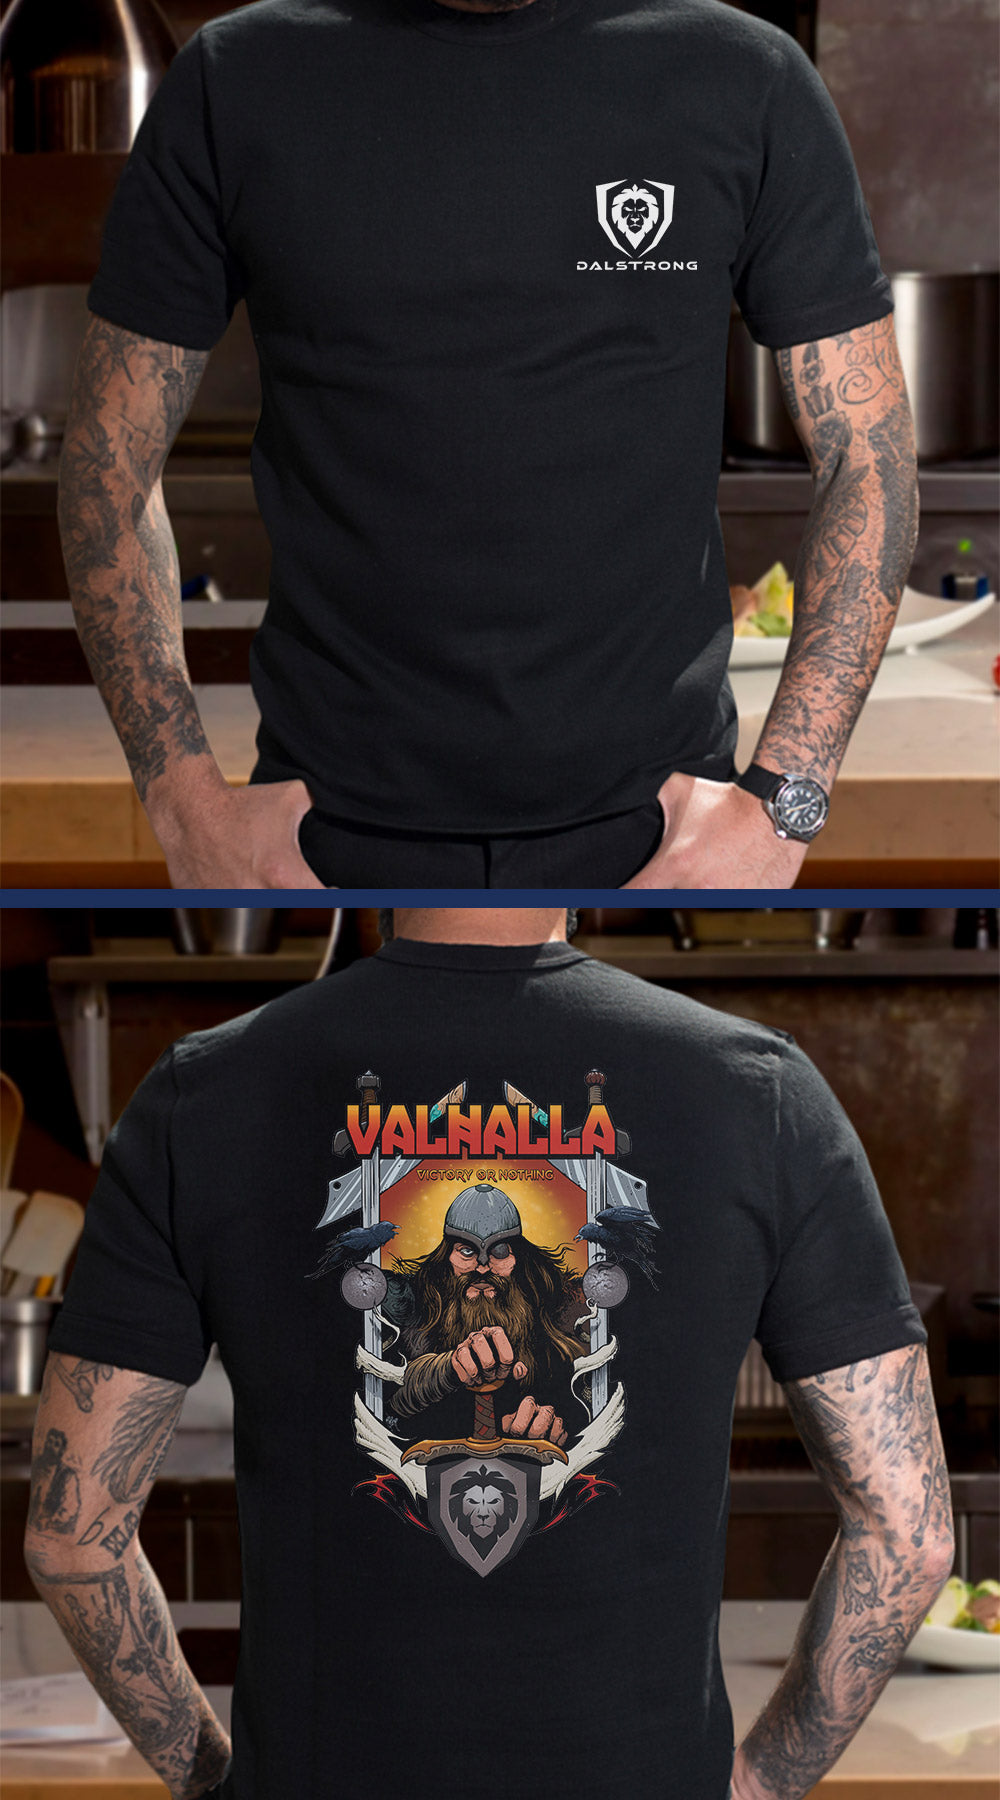 Dalstrong valhalla series tee x arik roper collab black front and back preview.